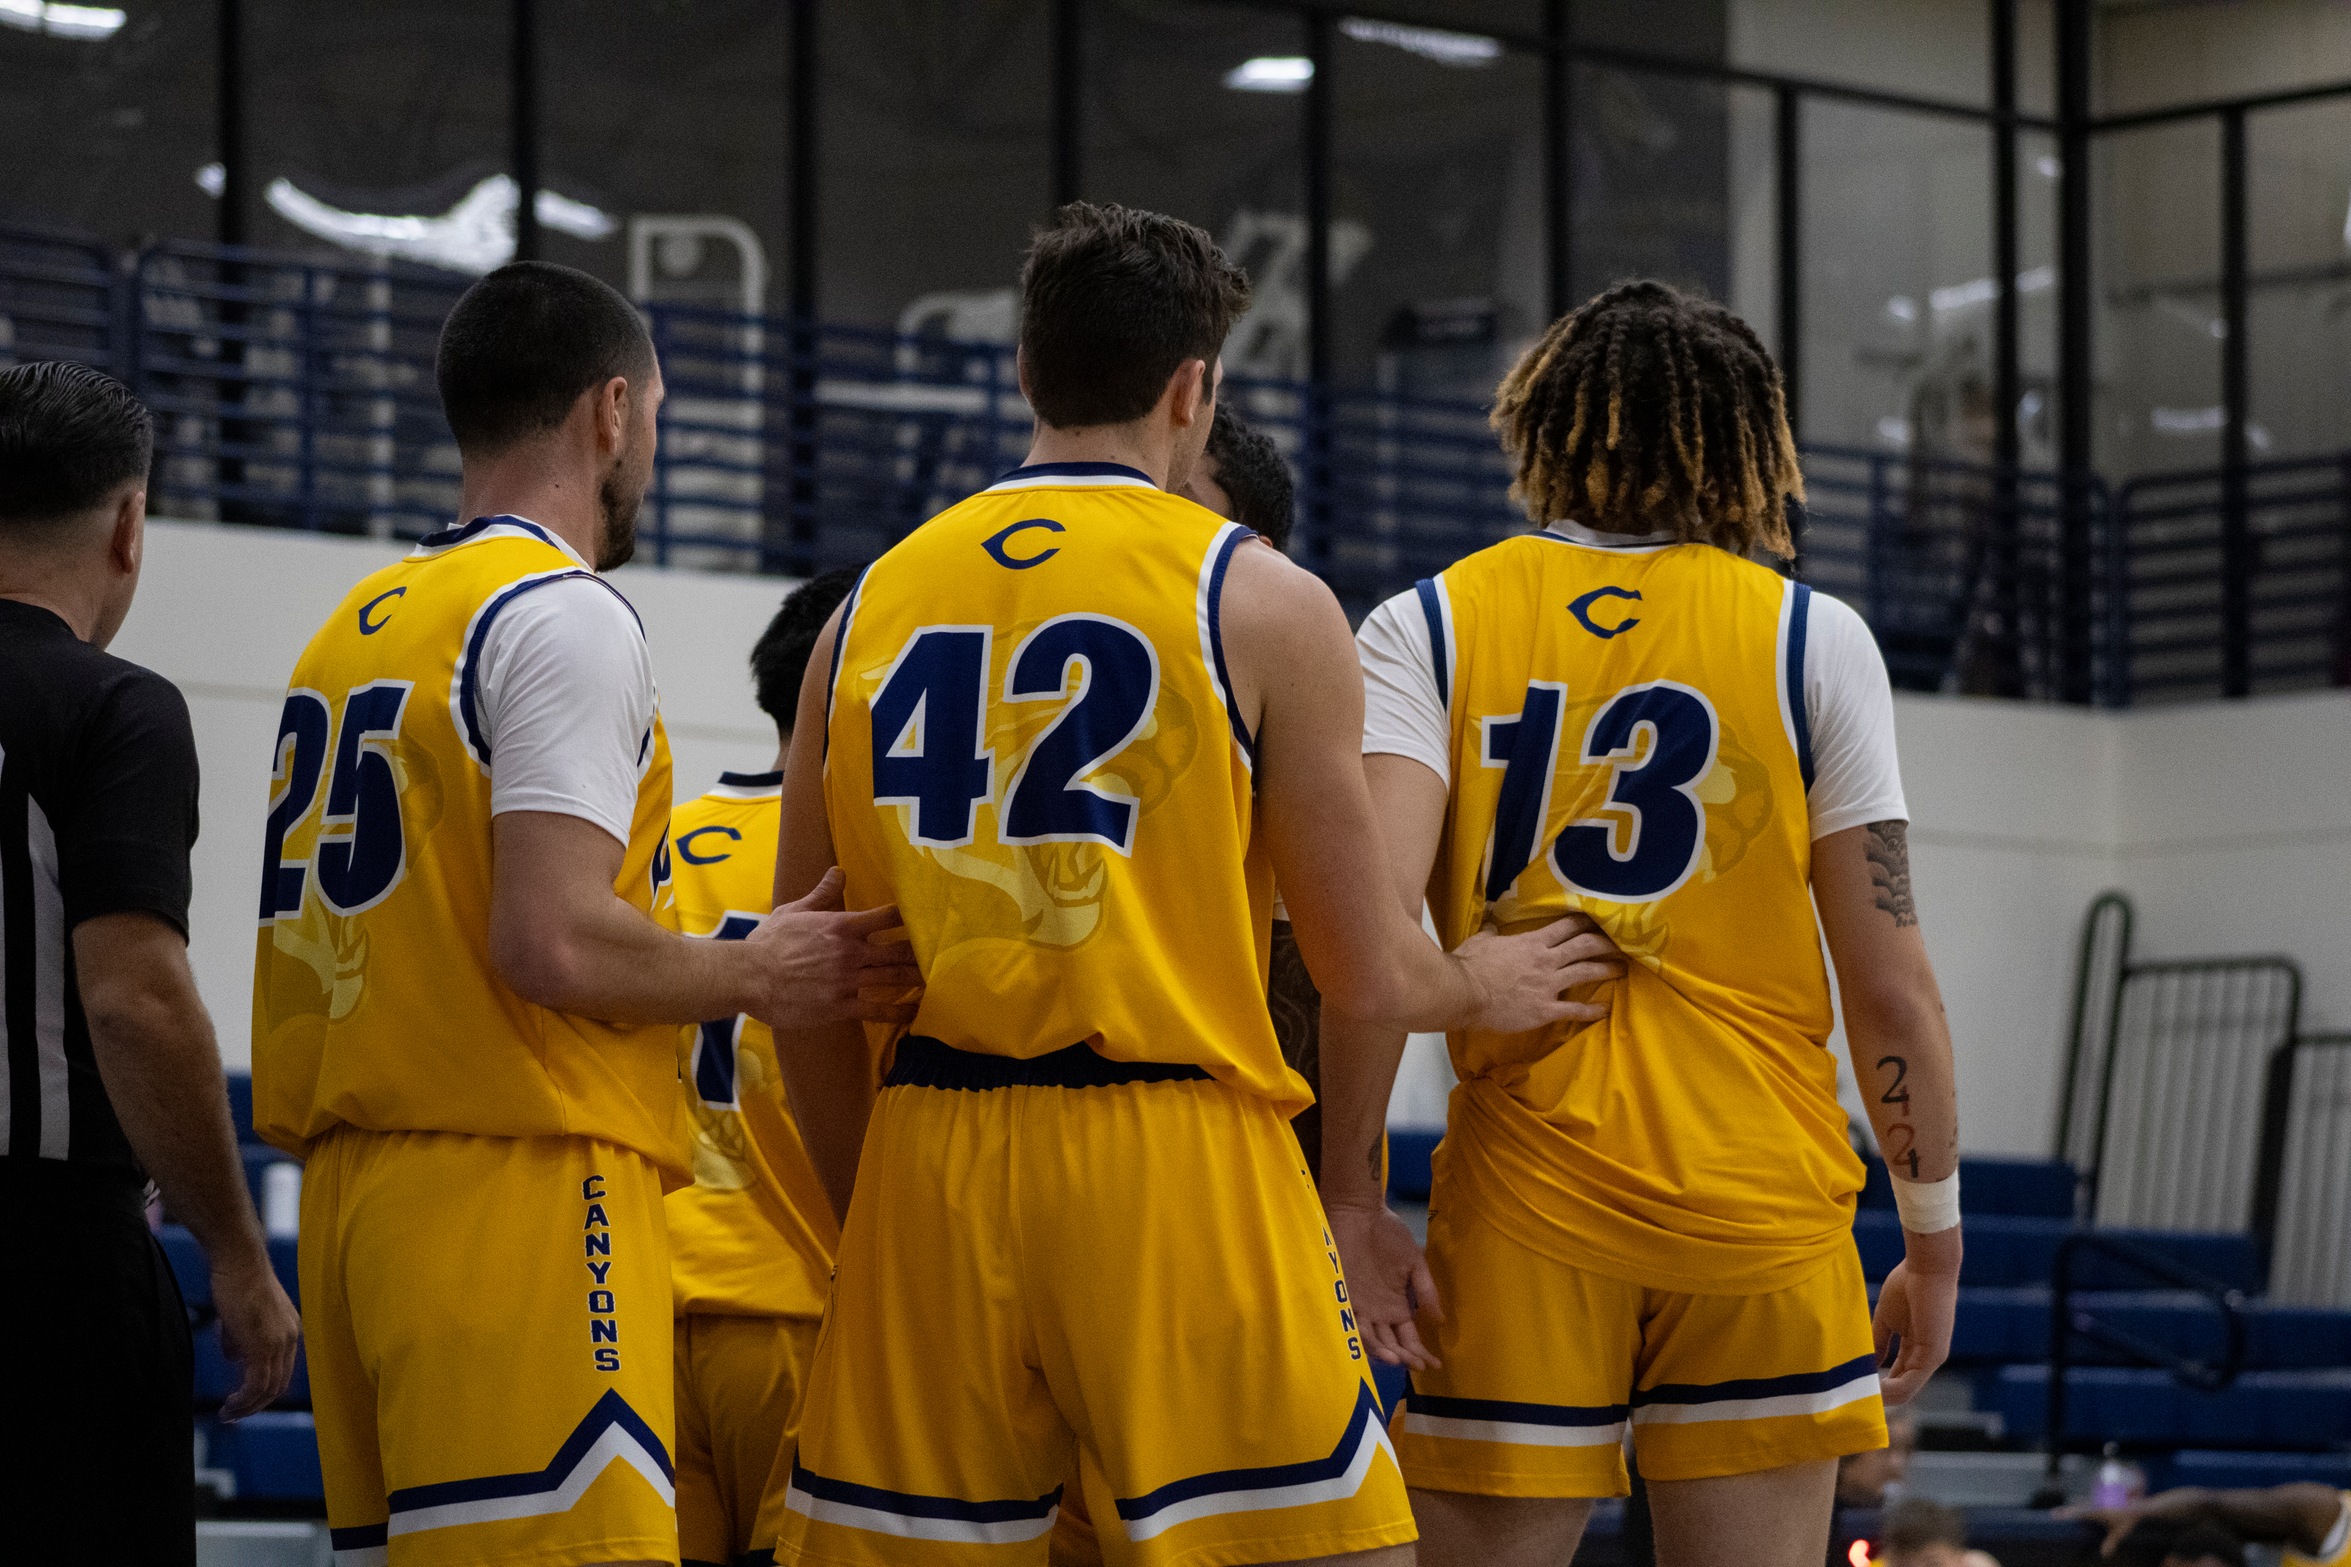 Stock College of the Canyons men's basketball image showing three players in yellow jerseys, with their back to the camera.